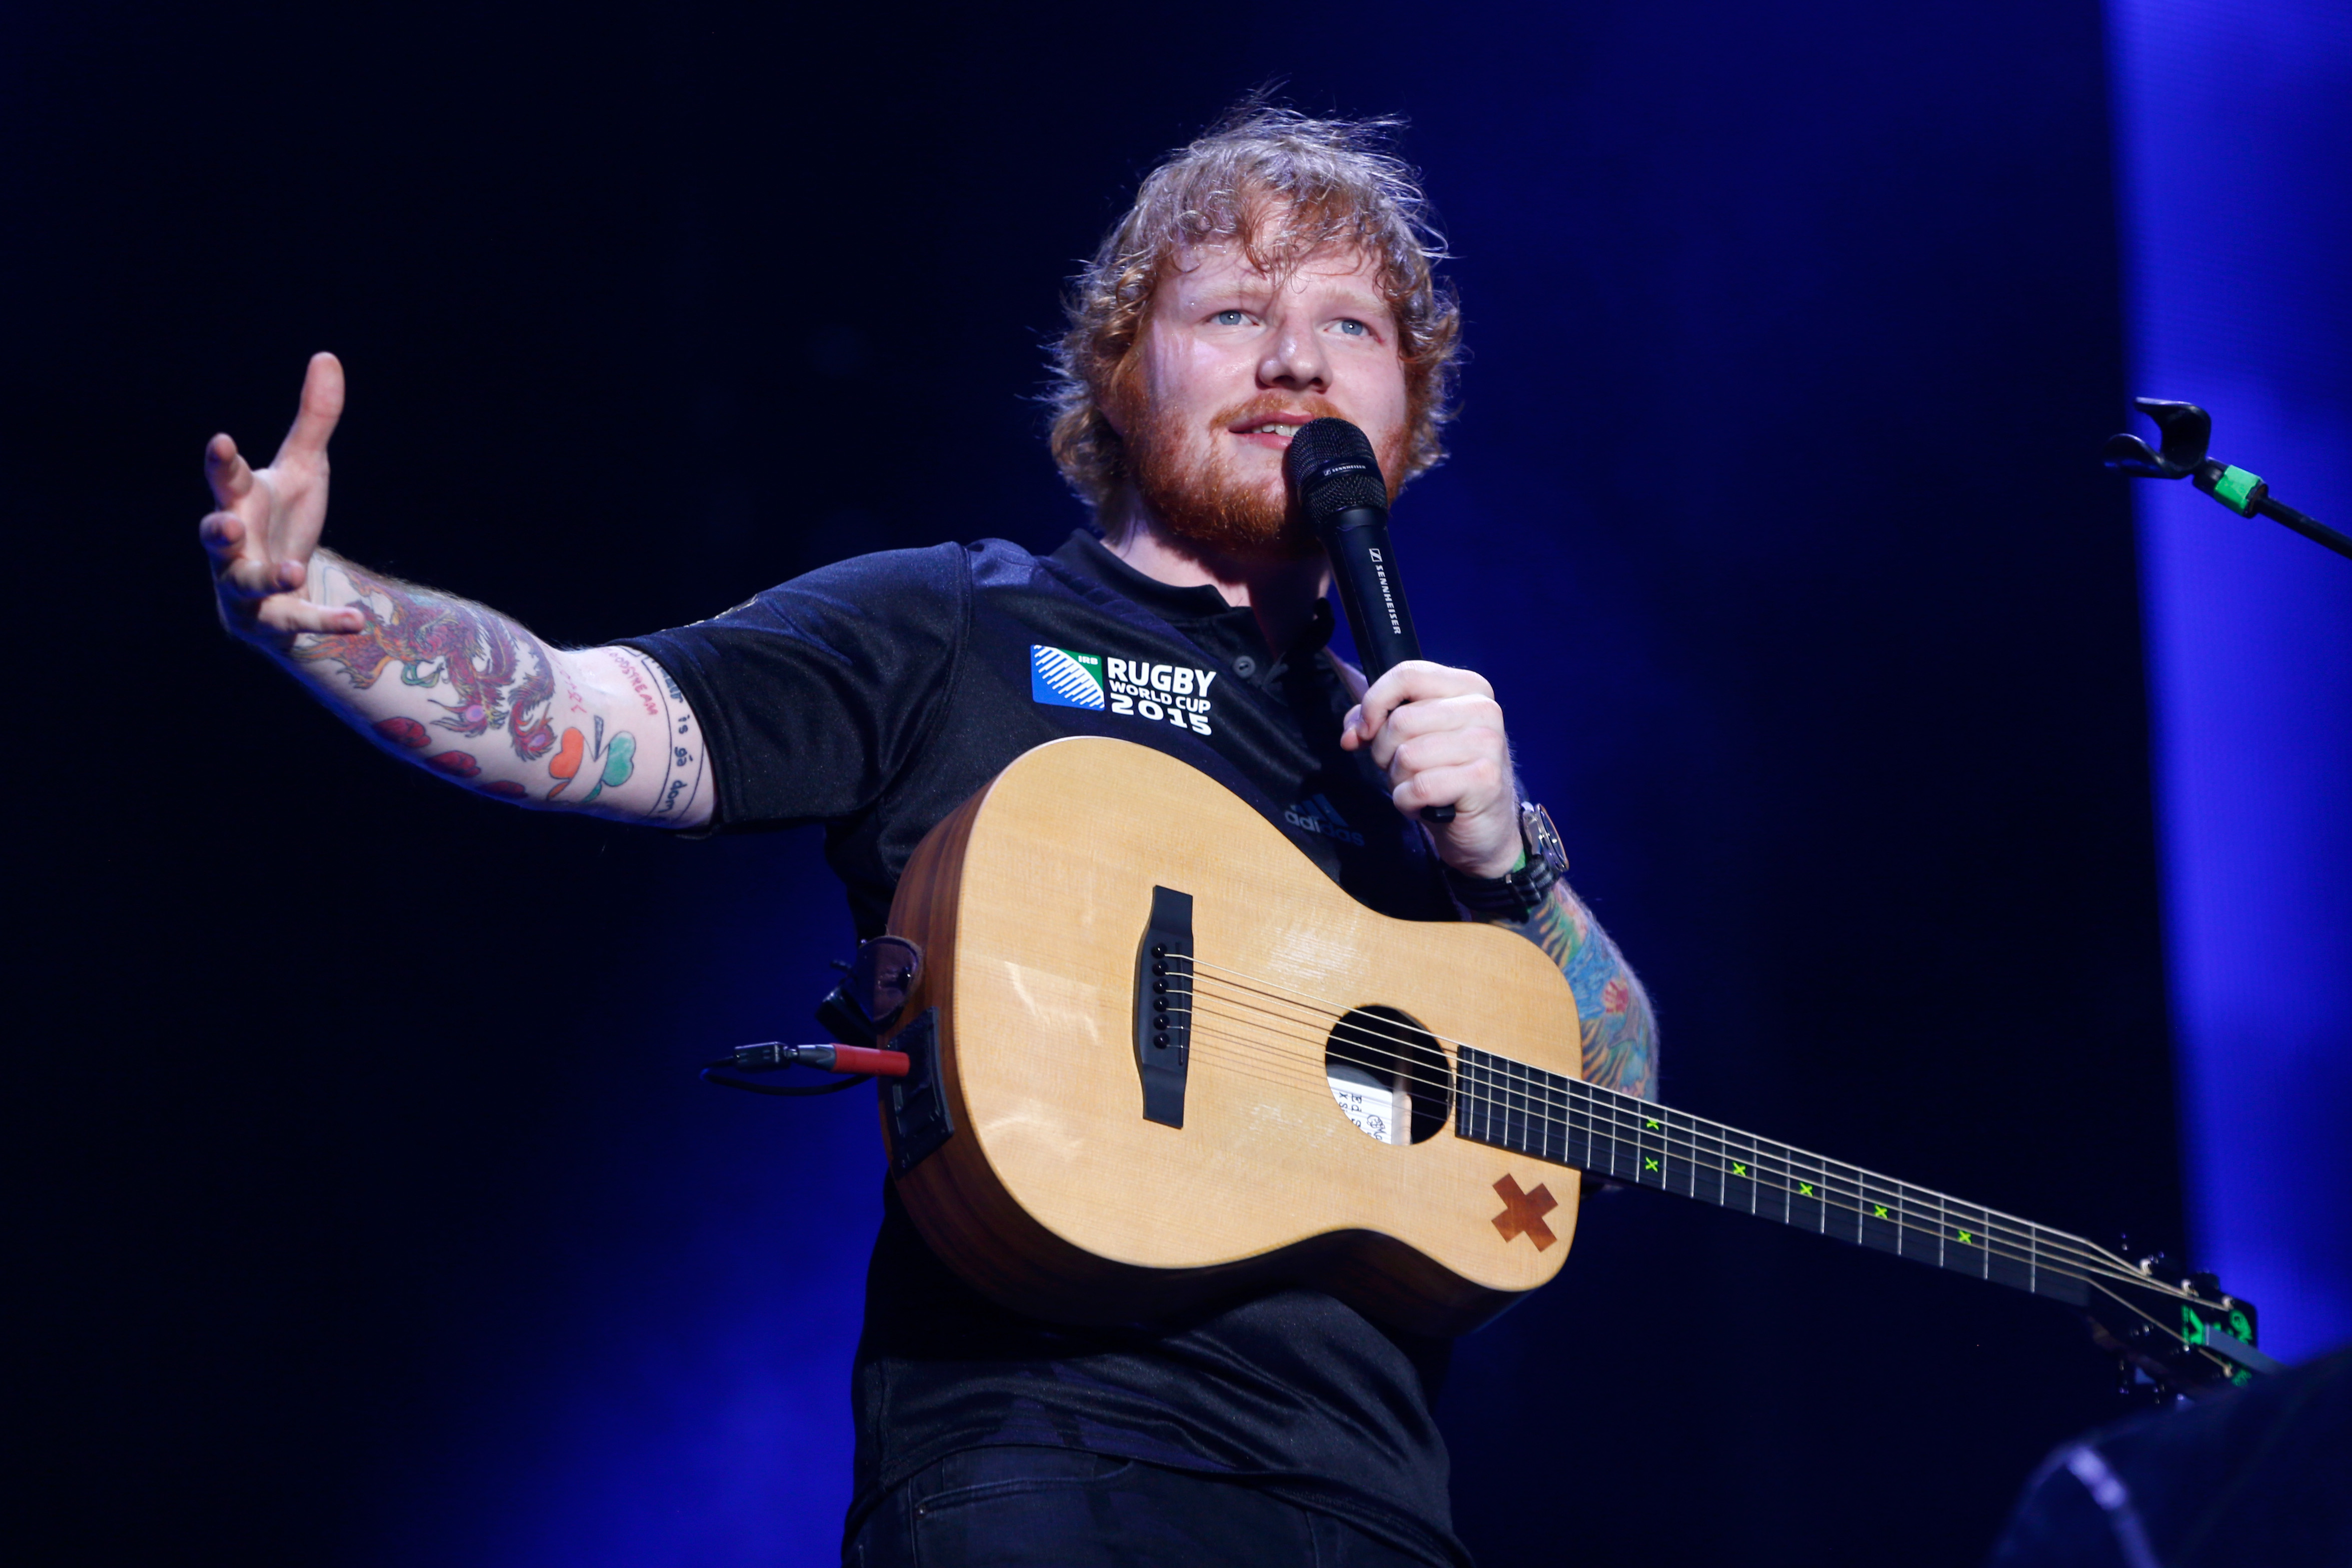 Ed Sheeran performs at Mt Smart Stadium on Dec. 12, 2015 in Auckland, New Zealand. (Phil Walter—Getty Images)